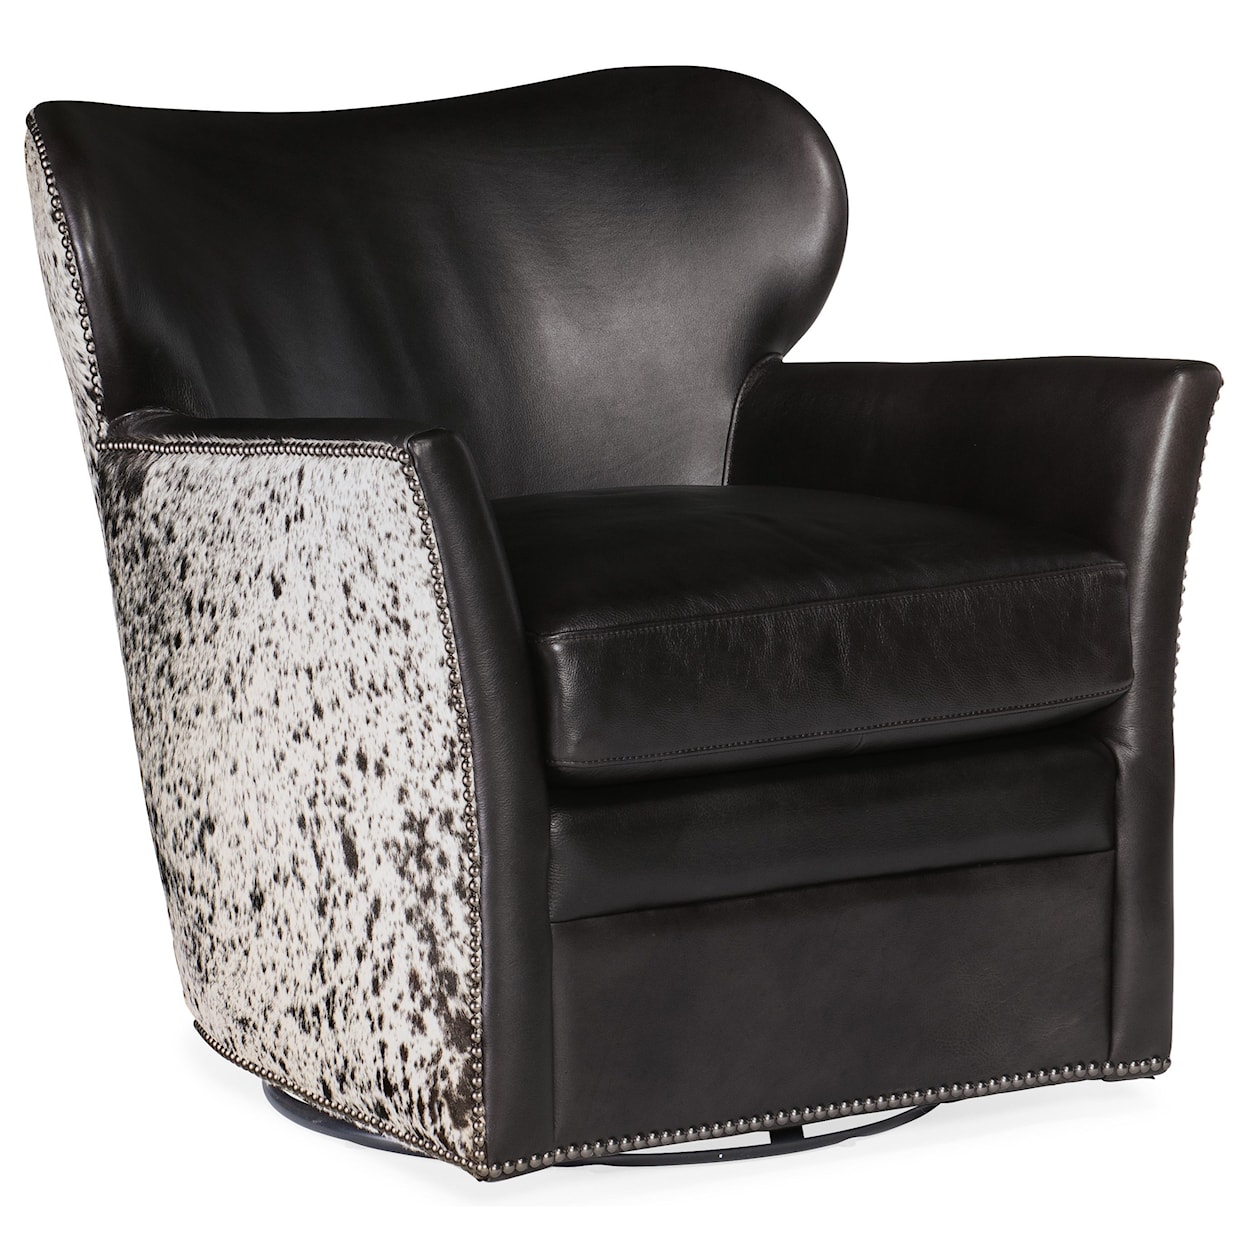 Hooker Furniture Club Chairs Kato Leather Swivel Chair with Hair on Hide